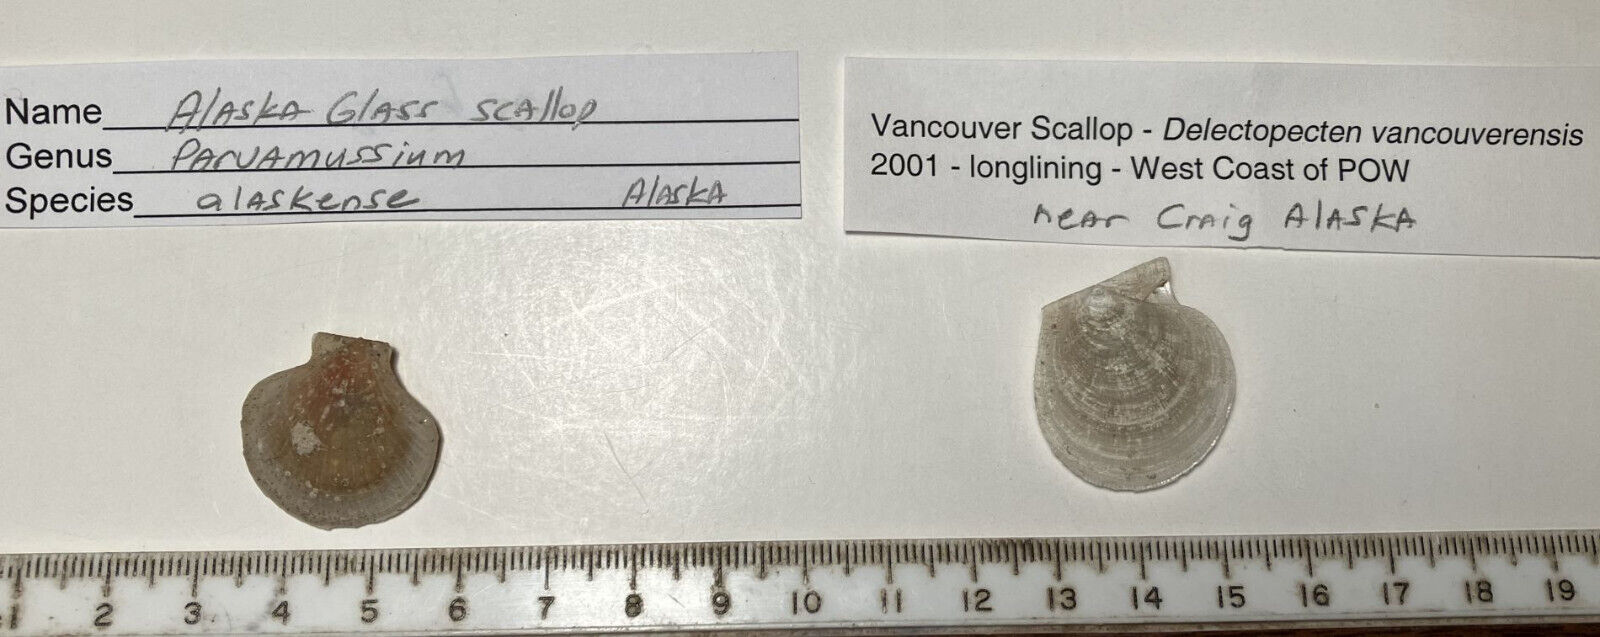 Vancouver Scallop and Glass Scallop.  Collected in Alaska. Very Rare